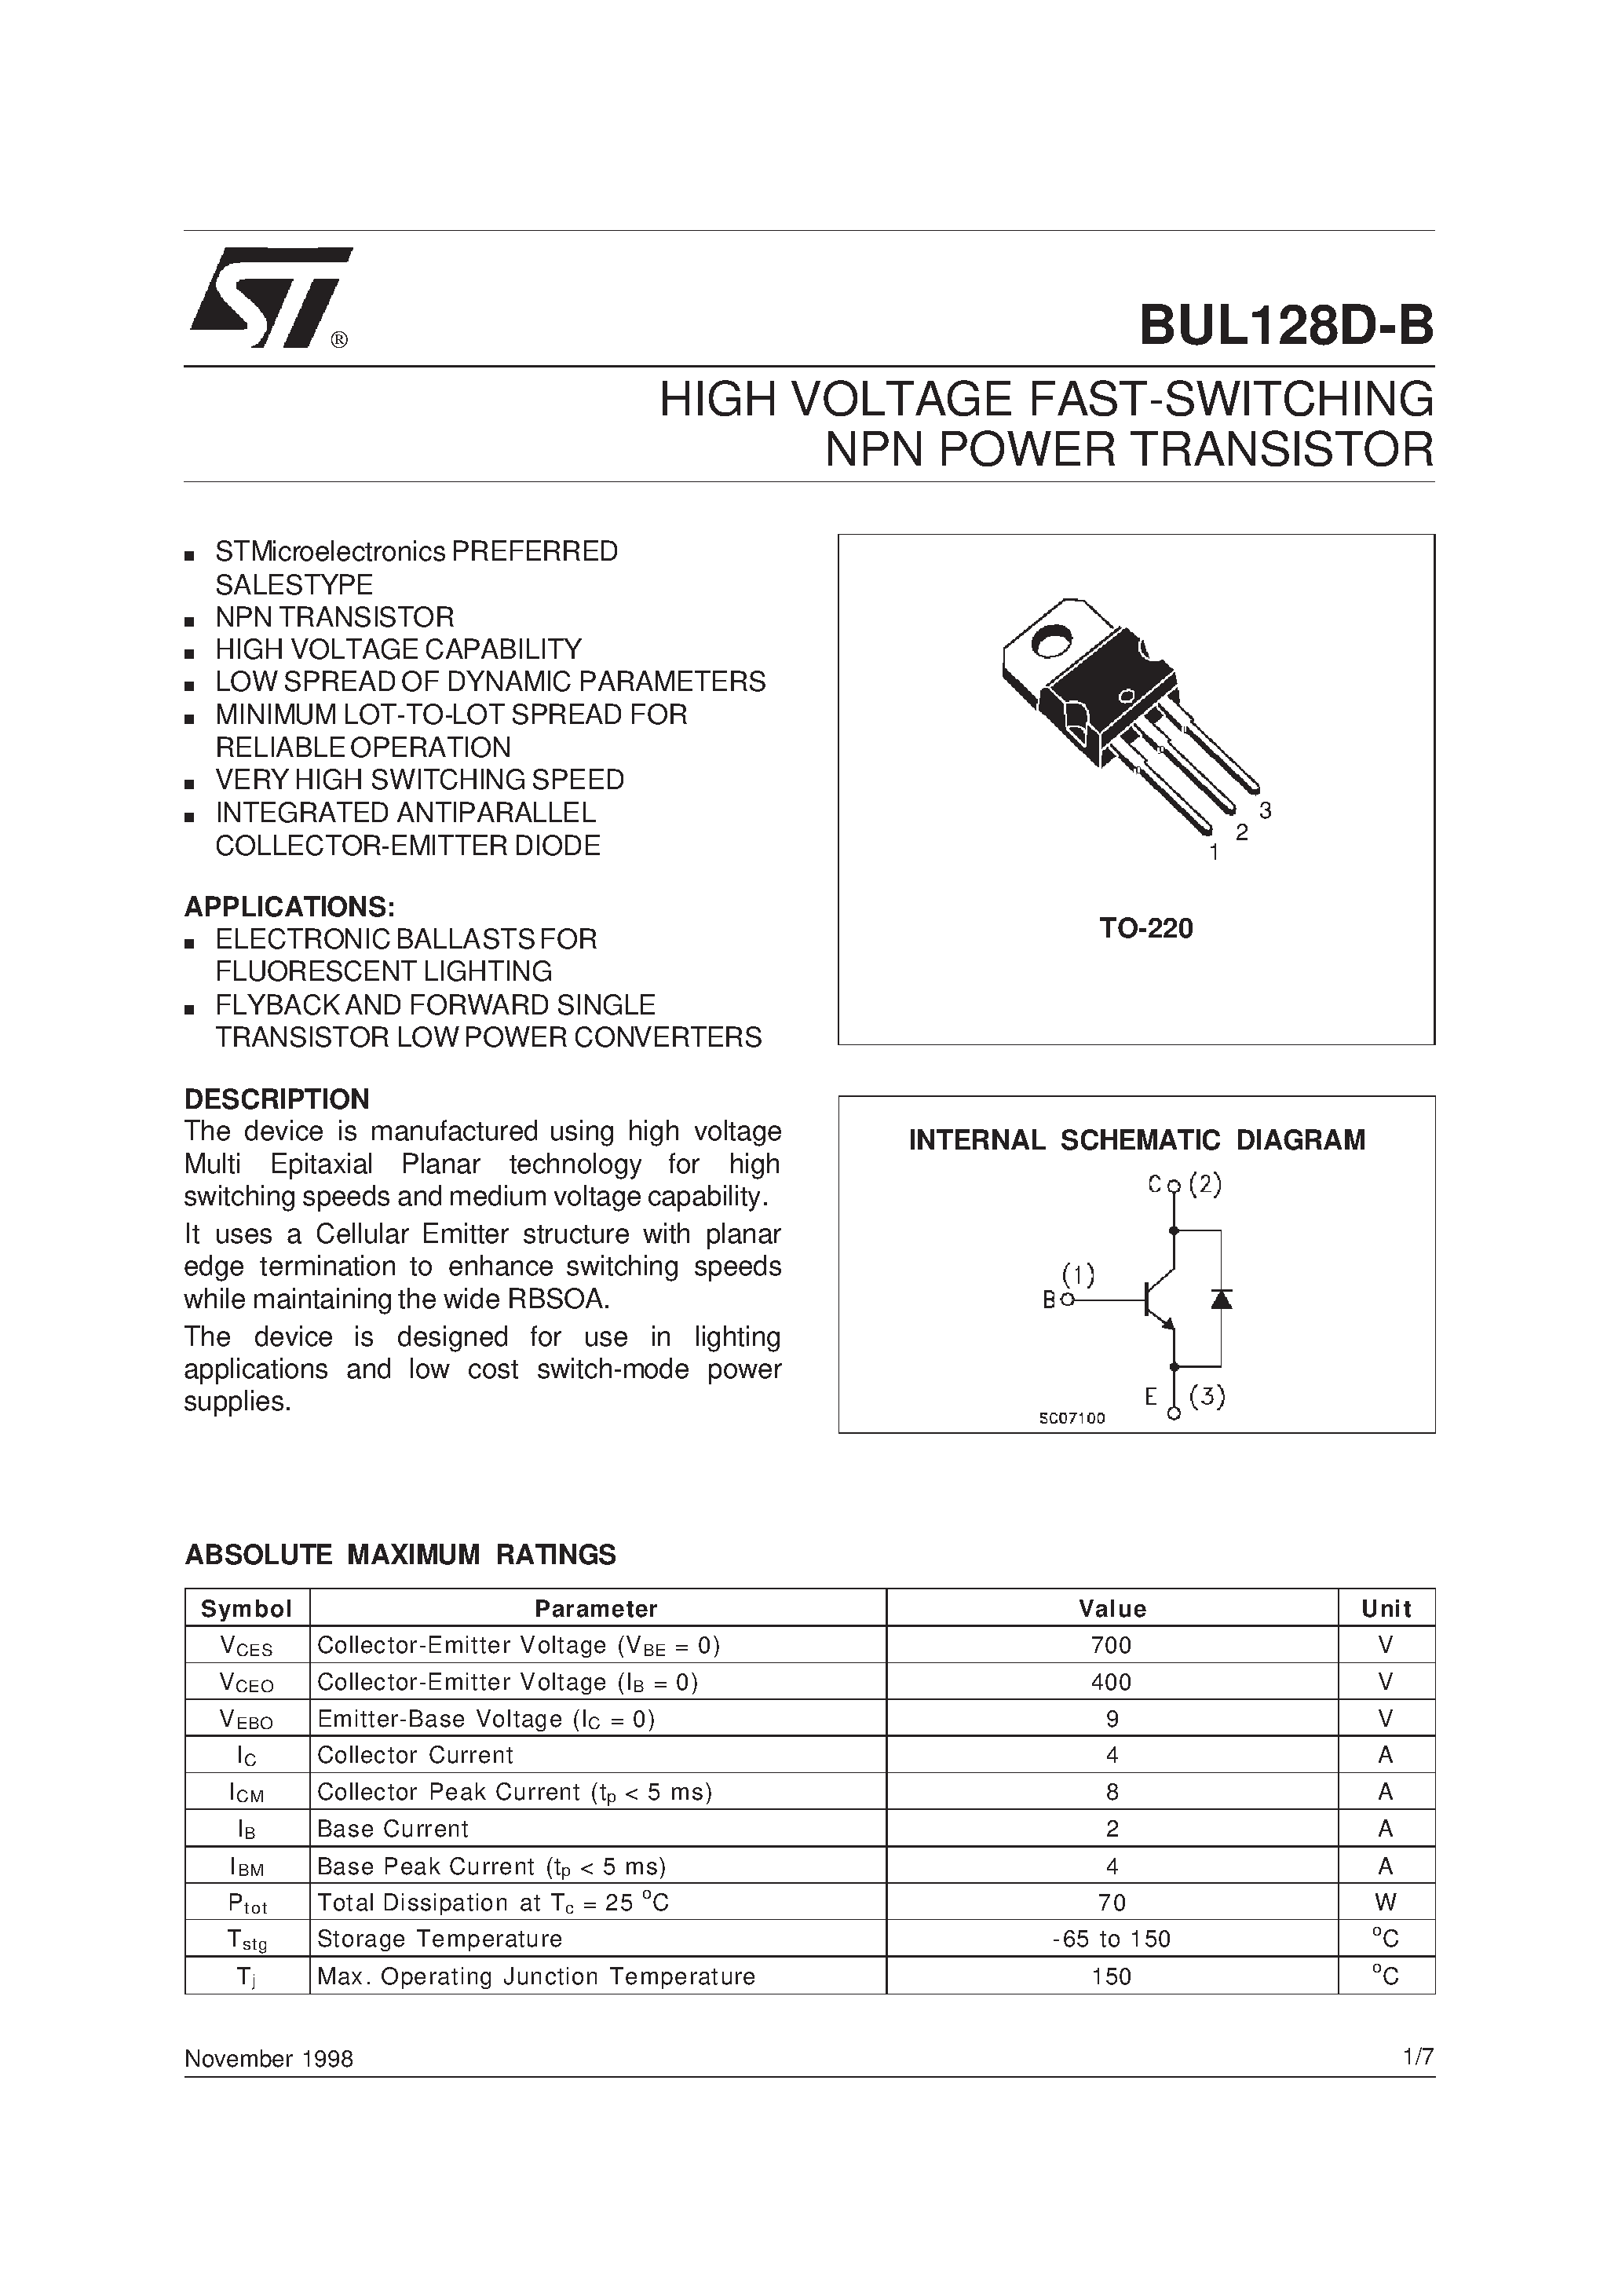 Datasheet BUL128D-B - HIGH VOLTAGE FAST-SWITCHING NPN POWER TRANSISTOR page 1